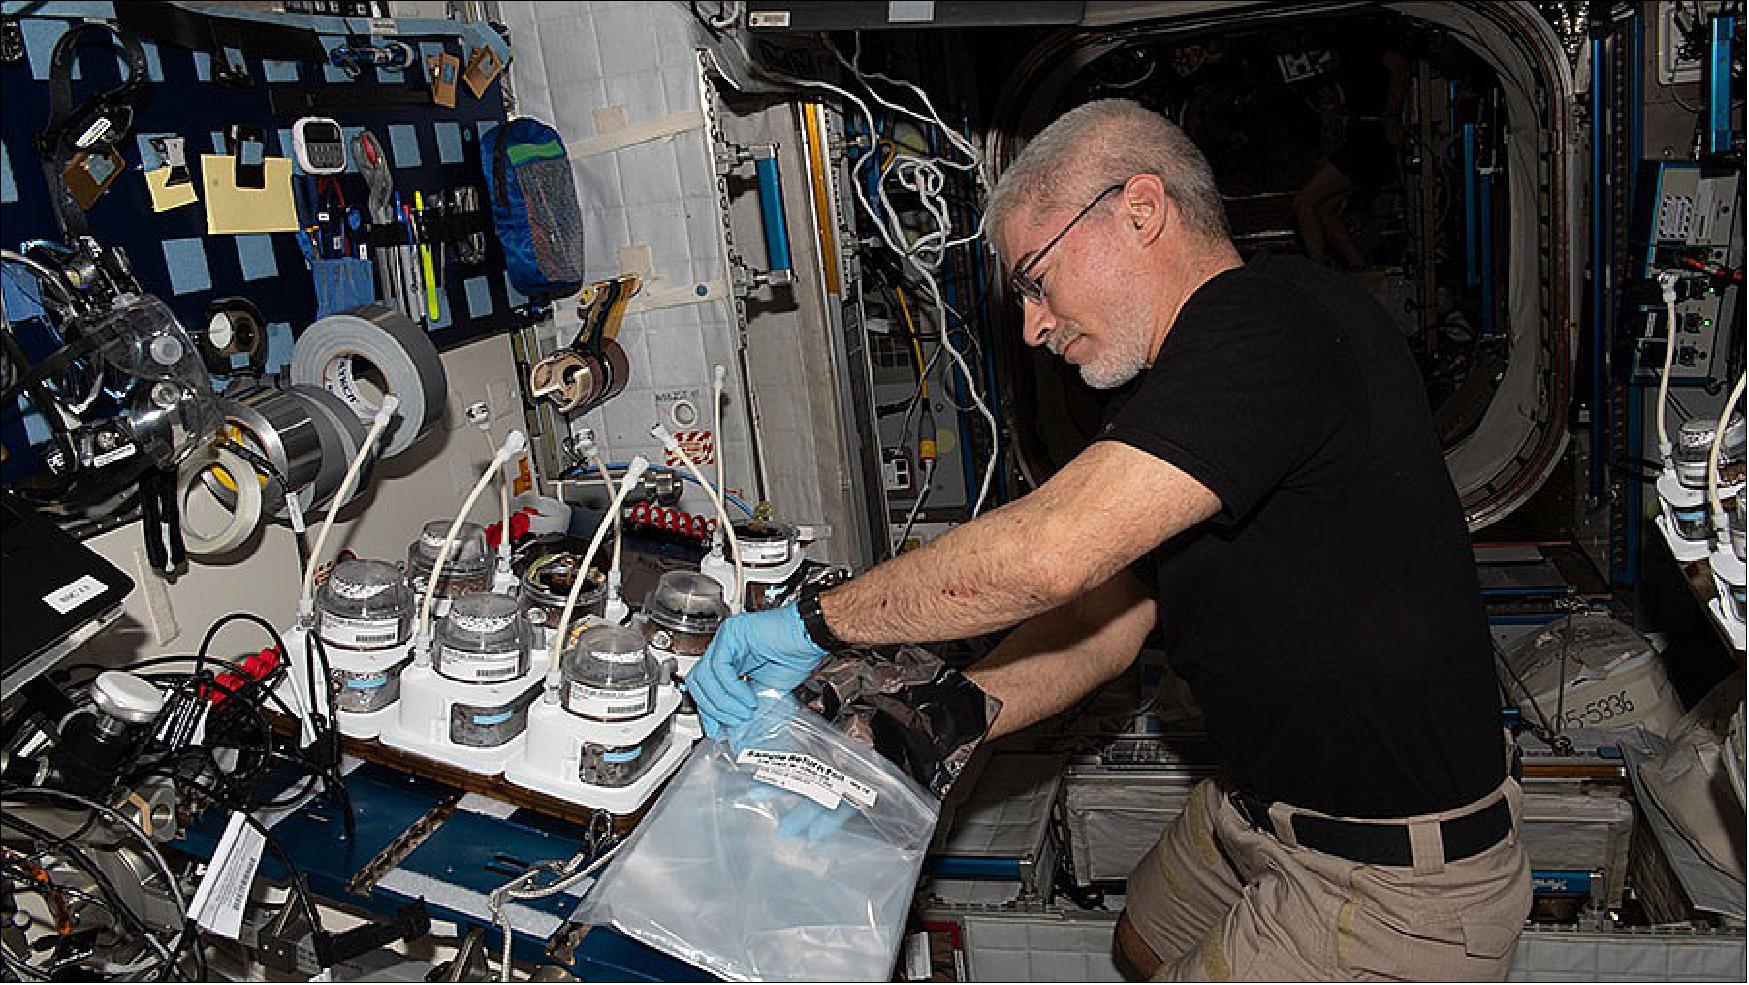 Figure 19: Astronaut Mark Vande Hei harvests plants and collects samples to analyze later for a space agriculture study (image credit: NASA)